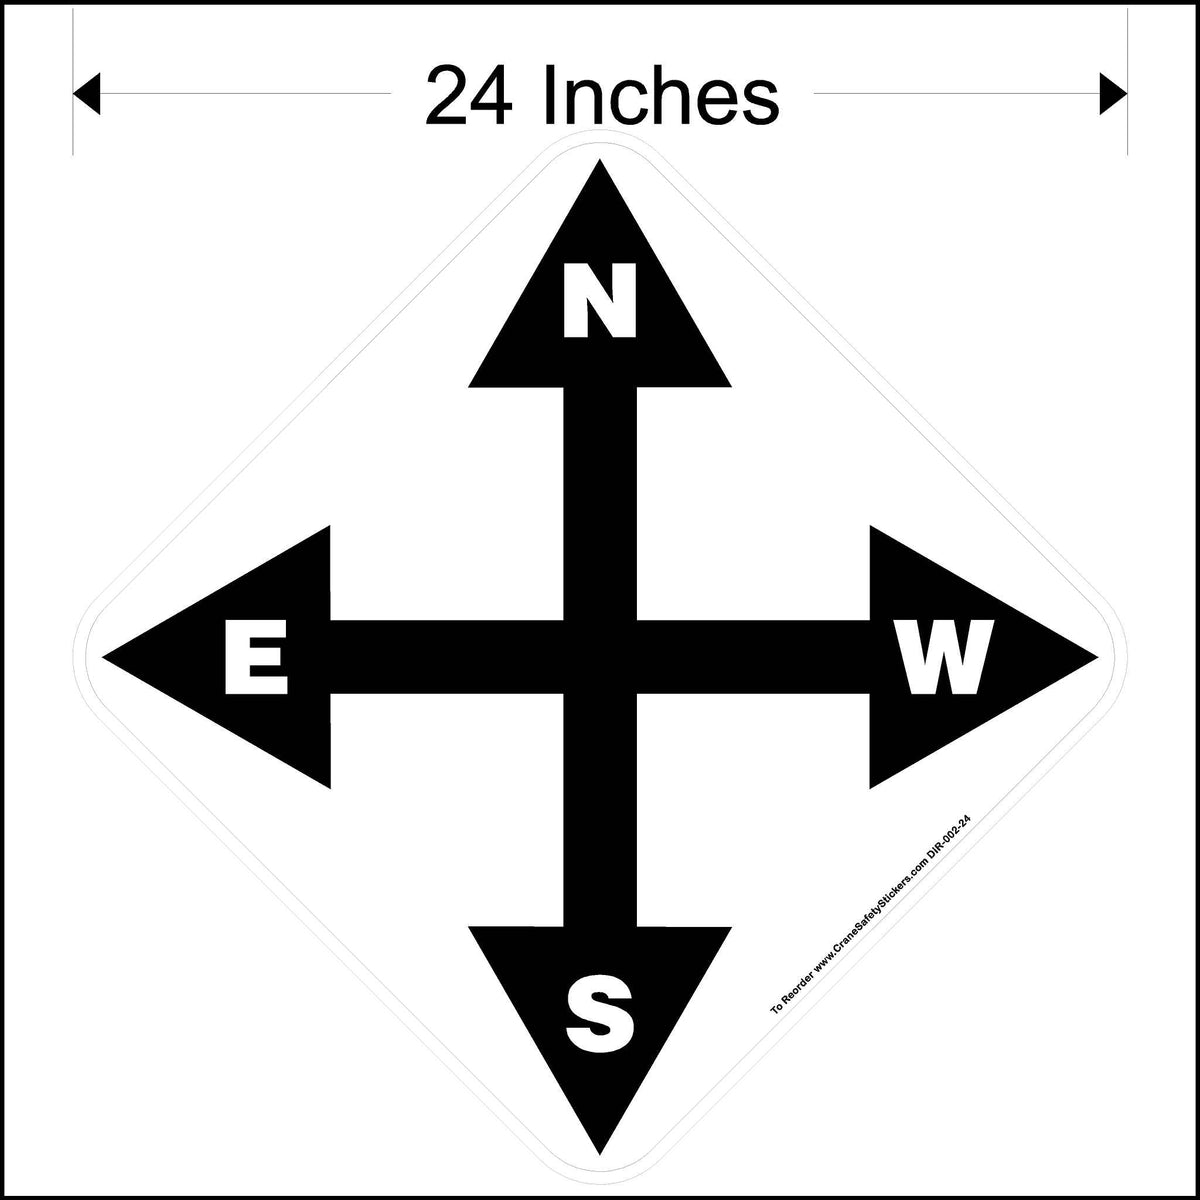 24 Inch North South West East Overhead Crane Directional Decal.